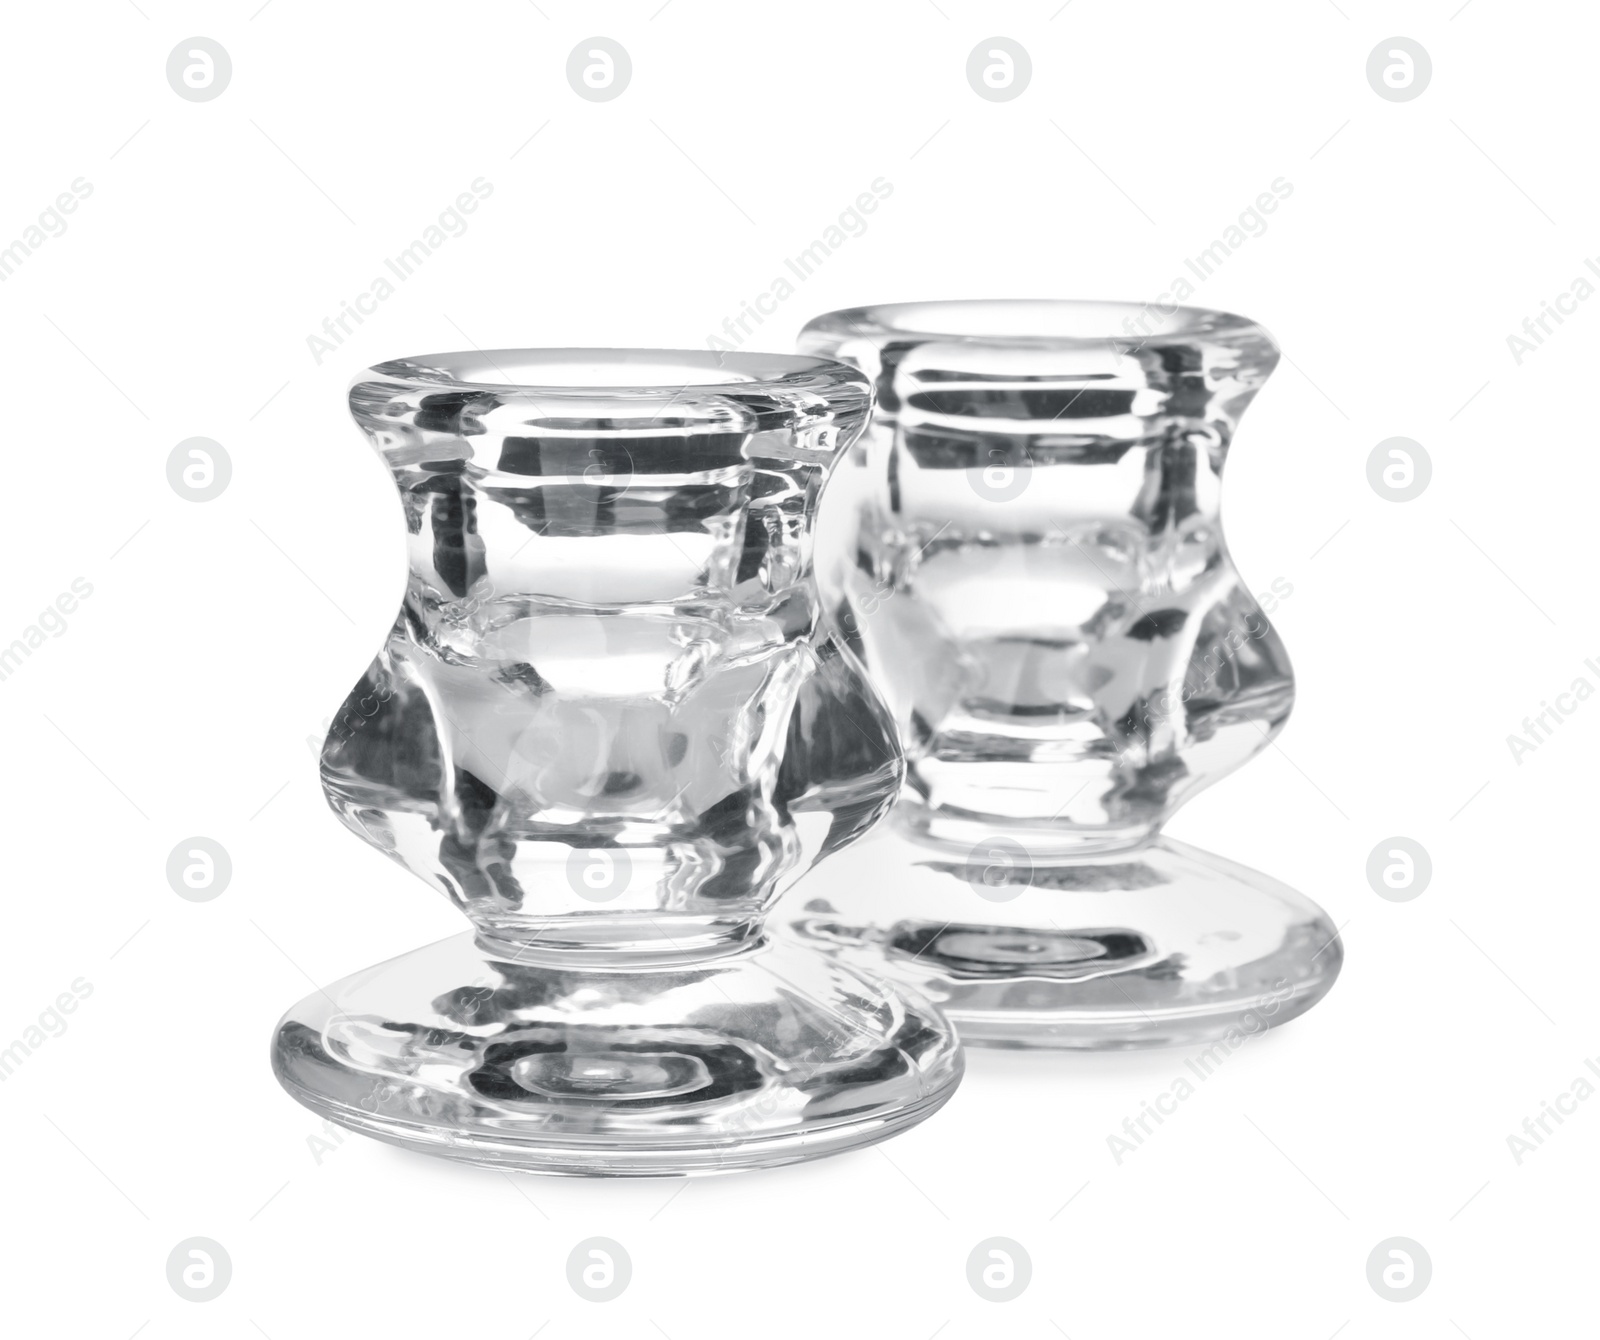 Photo of Small modern glass candlesticks on white background